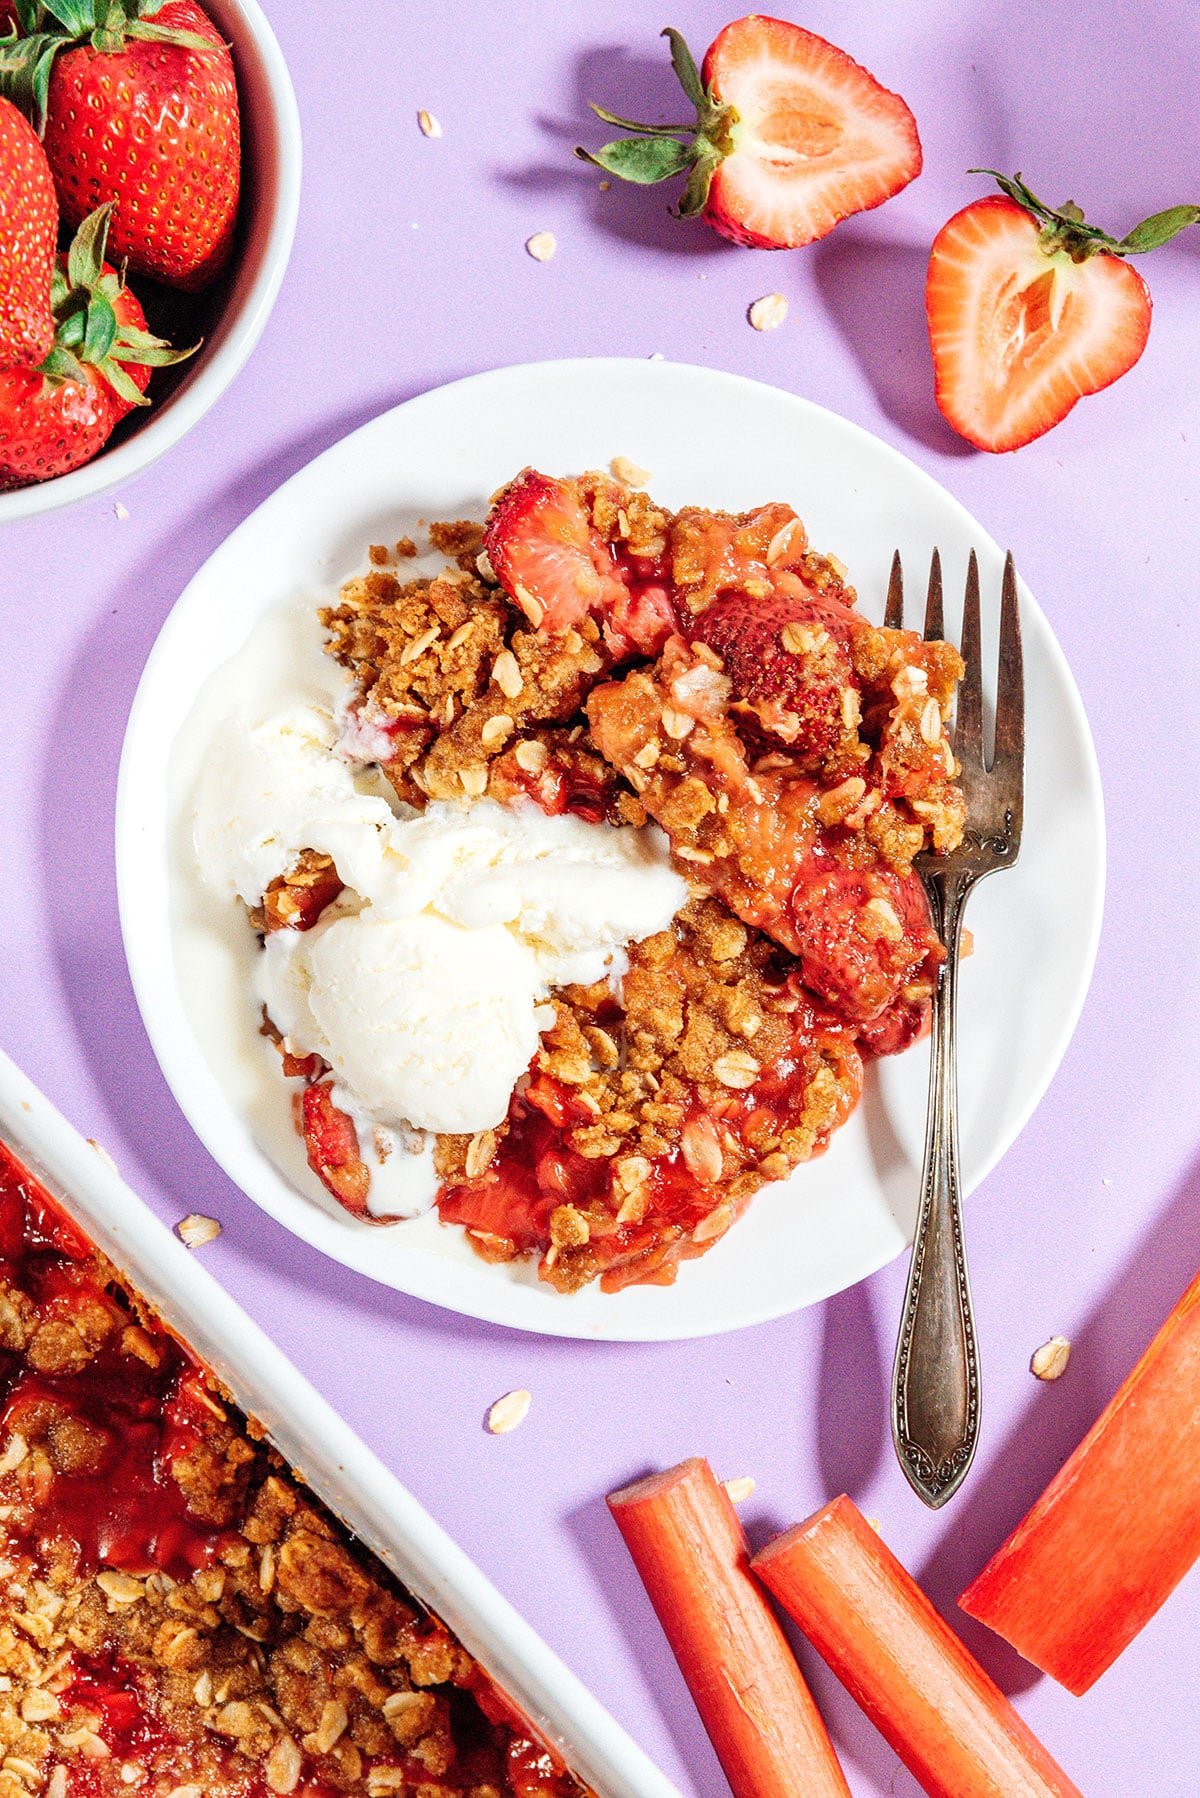 Rhubarb crisp with ice cream on a plate with a fork